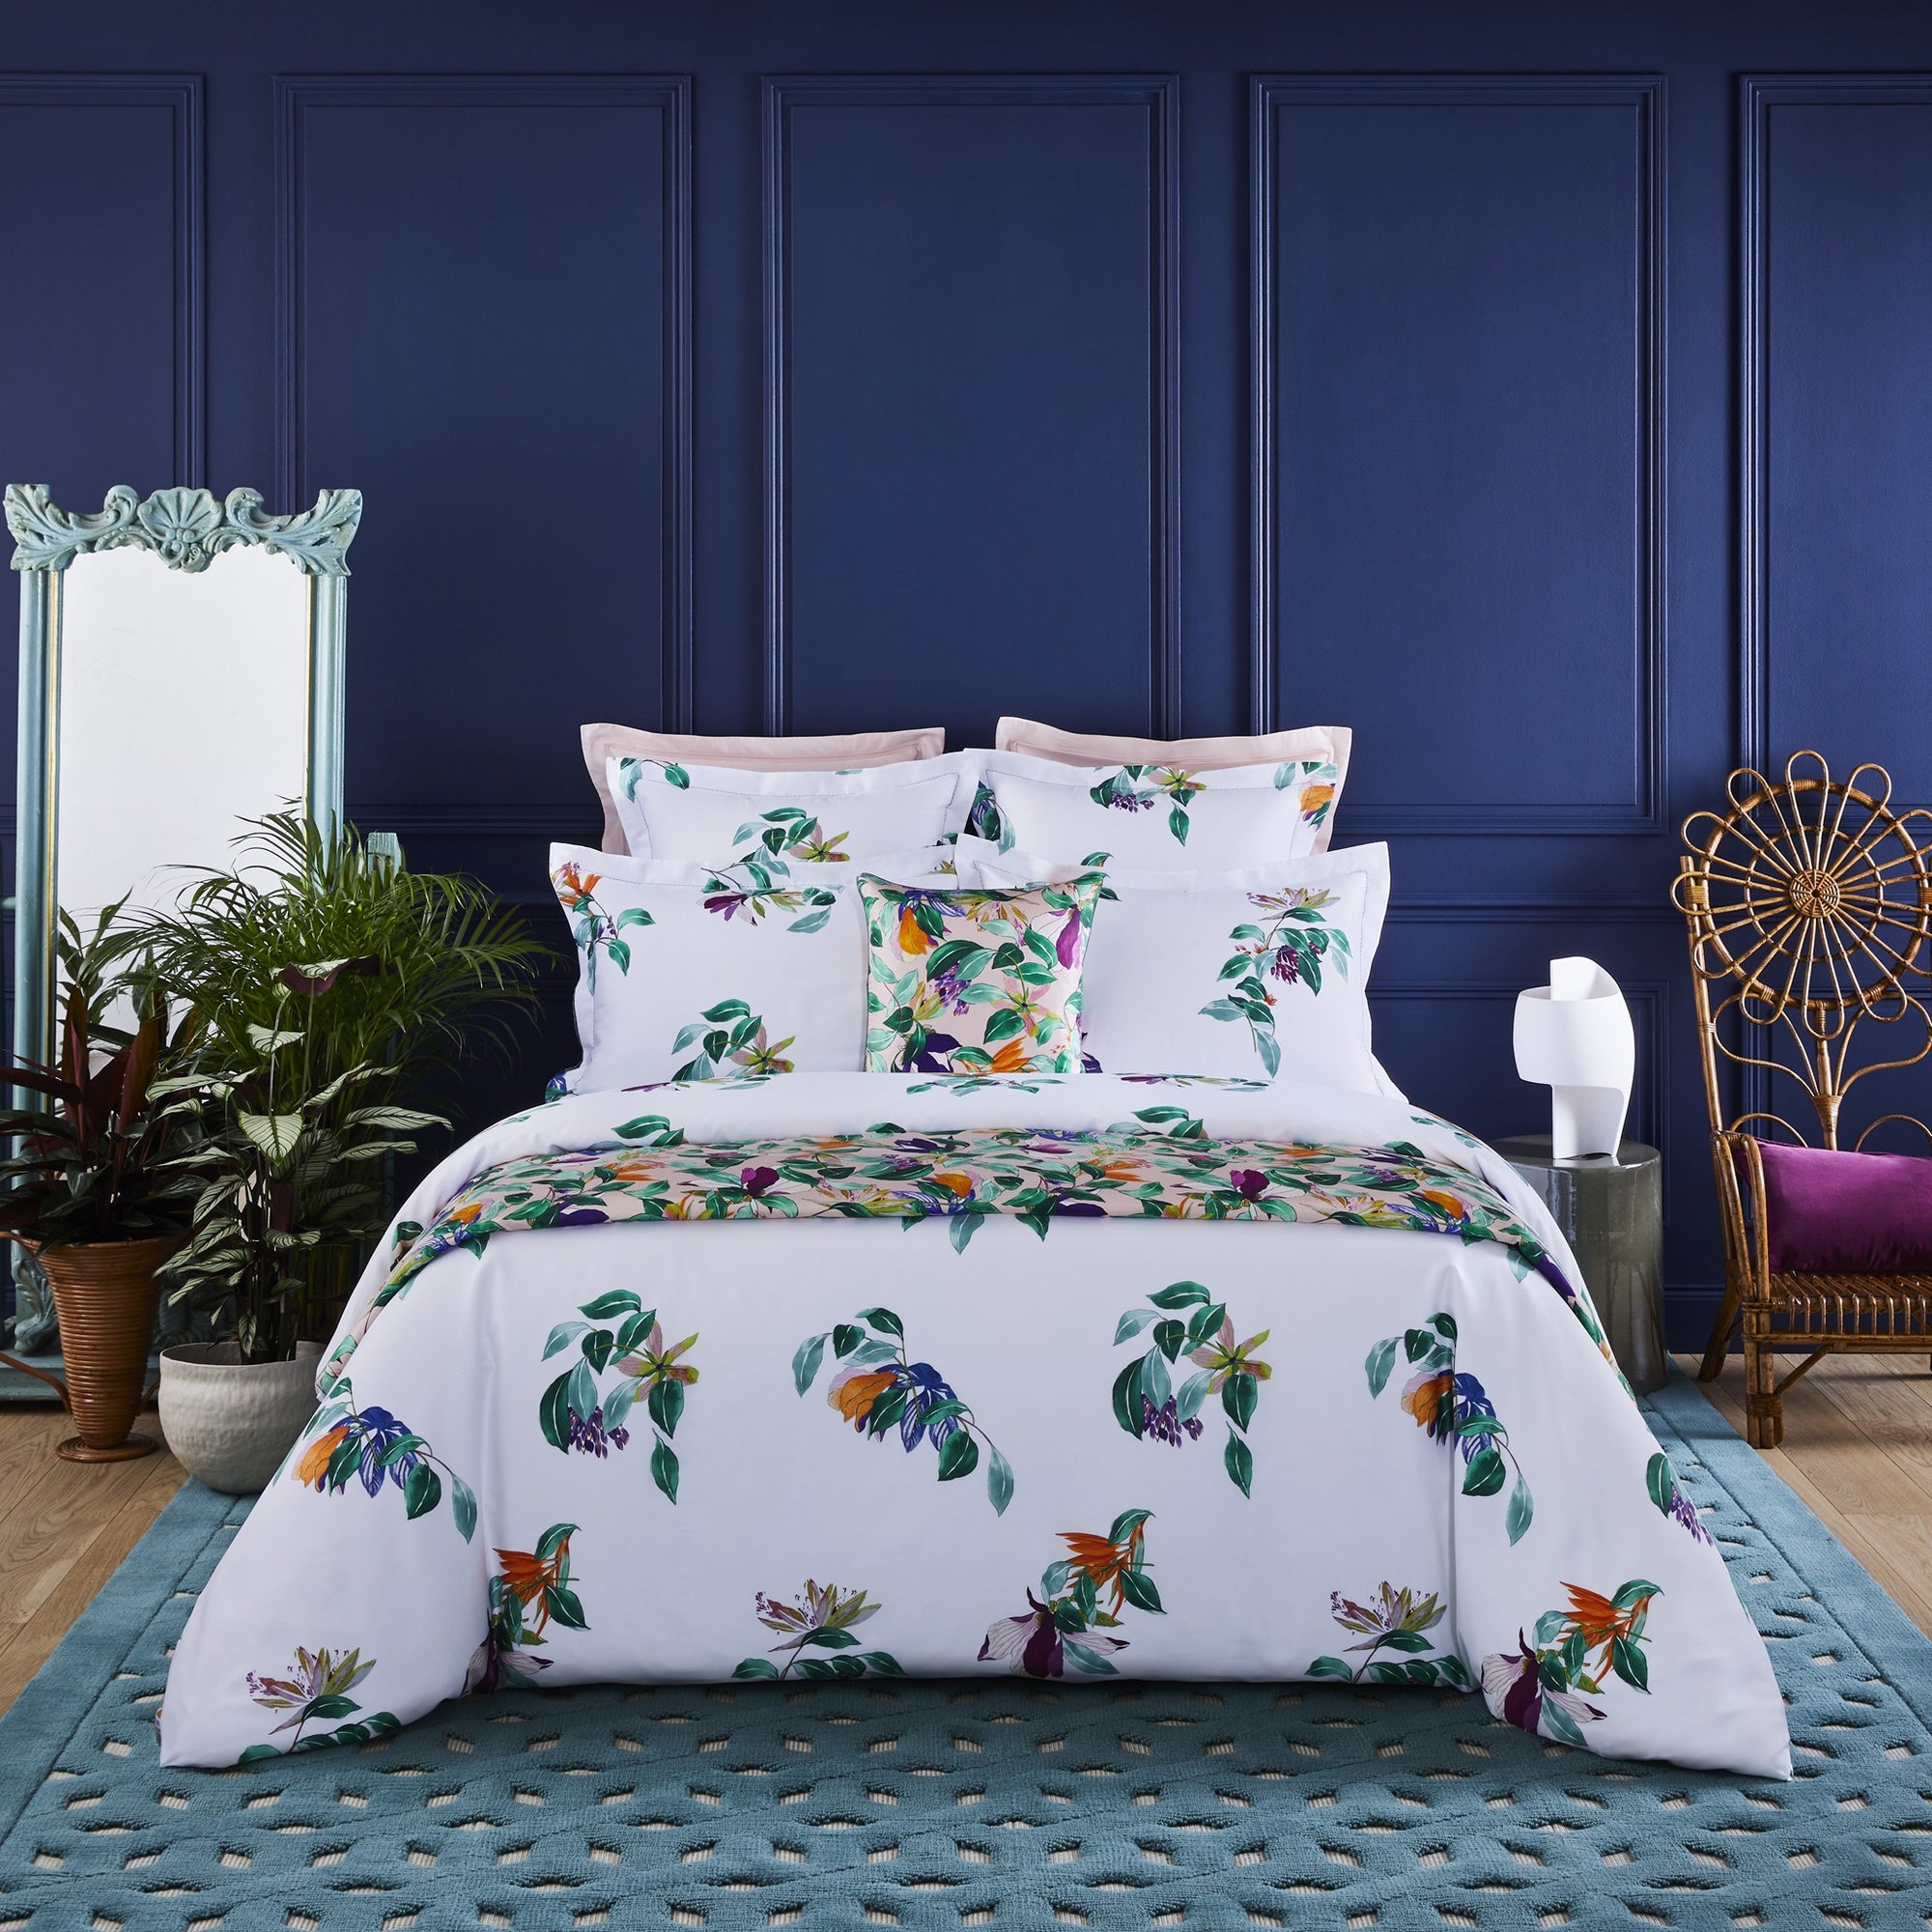 Bed Dressed in Yves Delorme Parfum Bedding